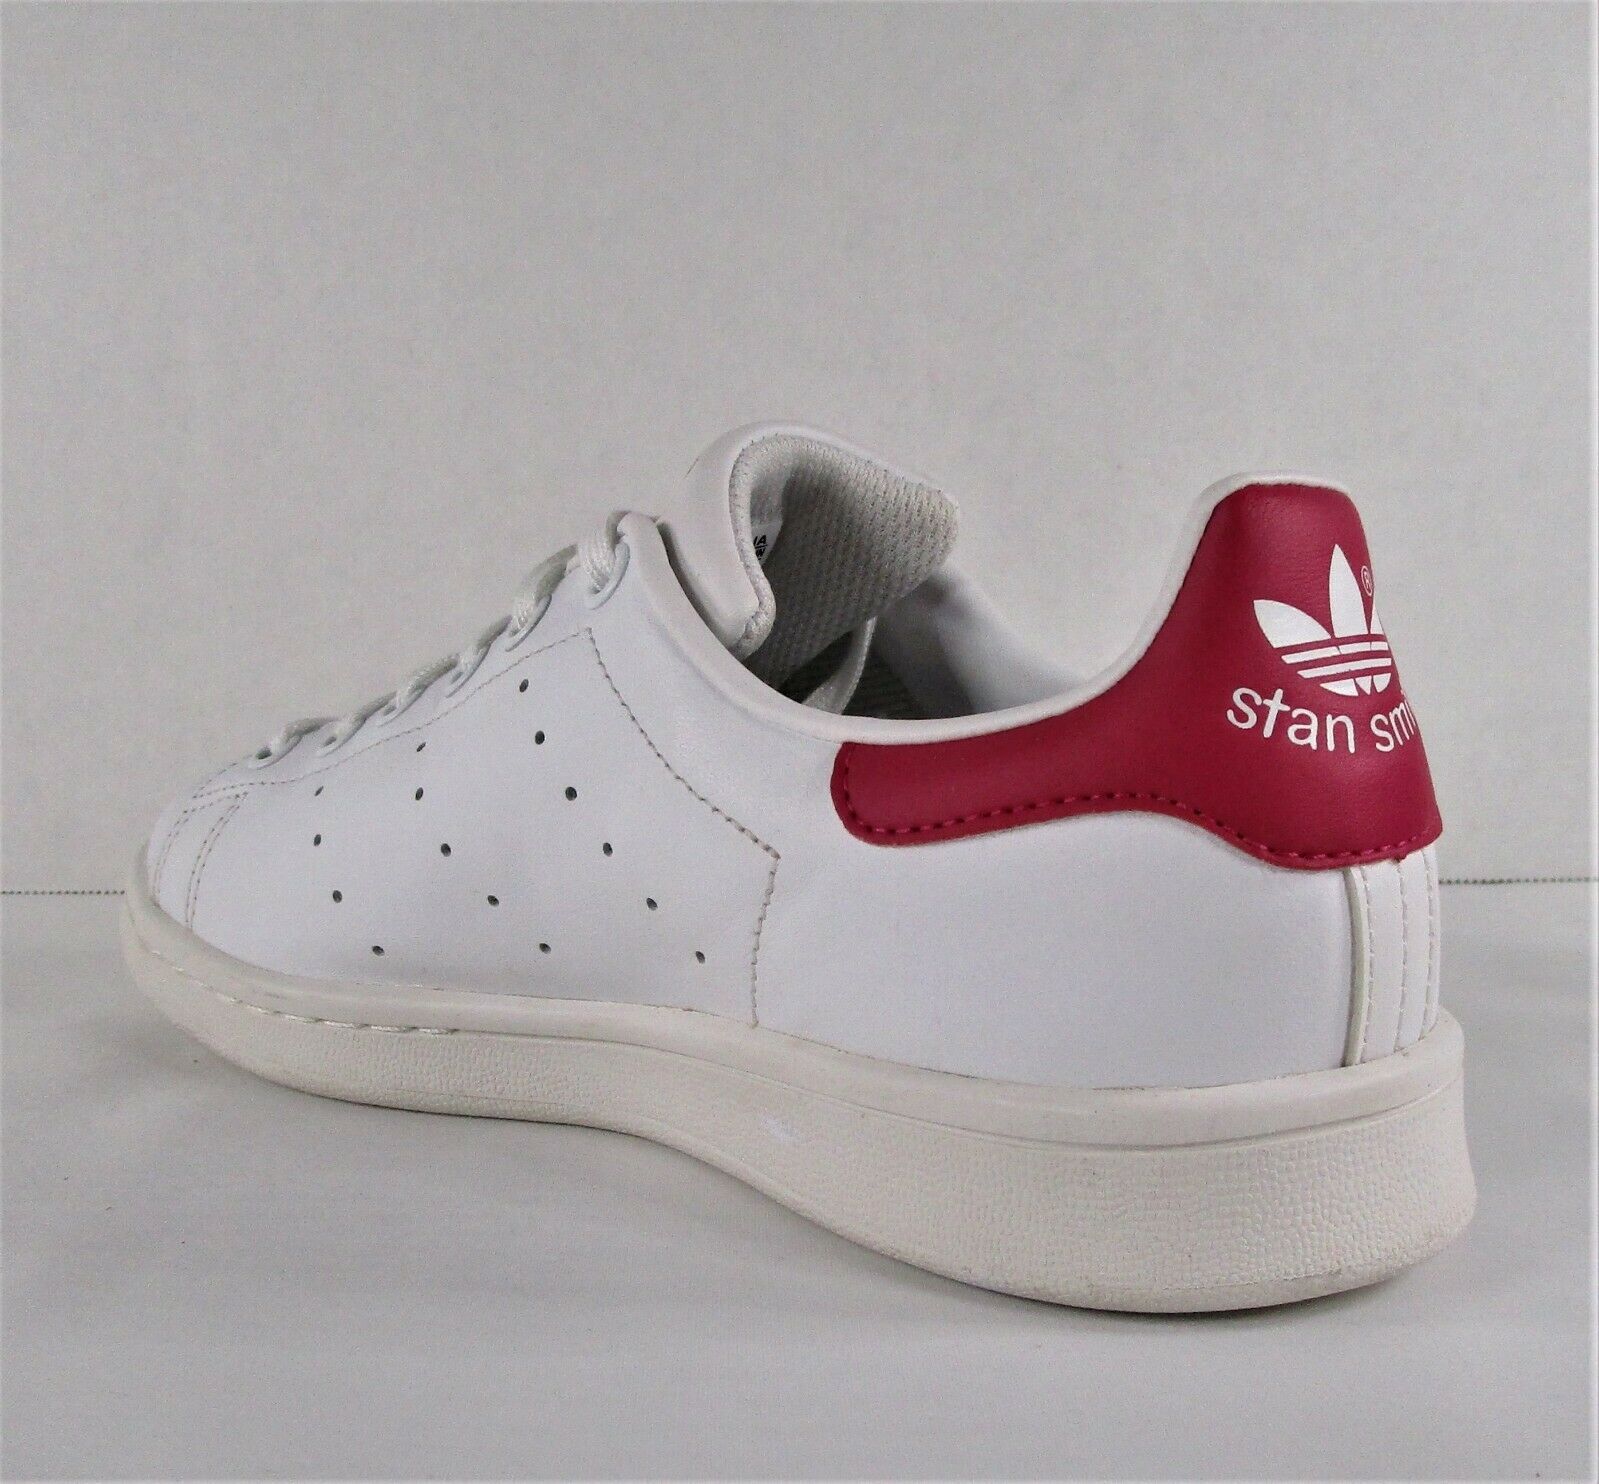 Adidas Stan Smith Athletic Shoes Women's US Sz 6.5 - 7 Casual Sneakers ...